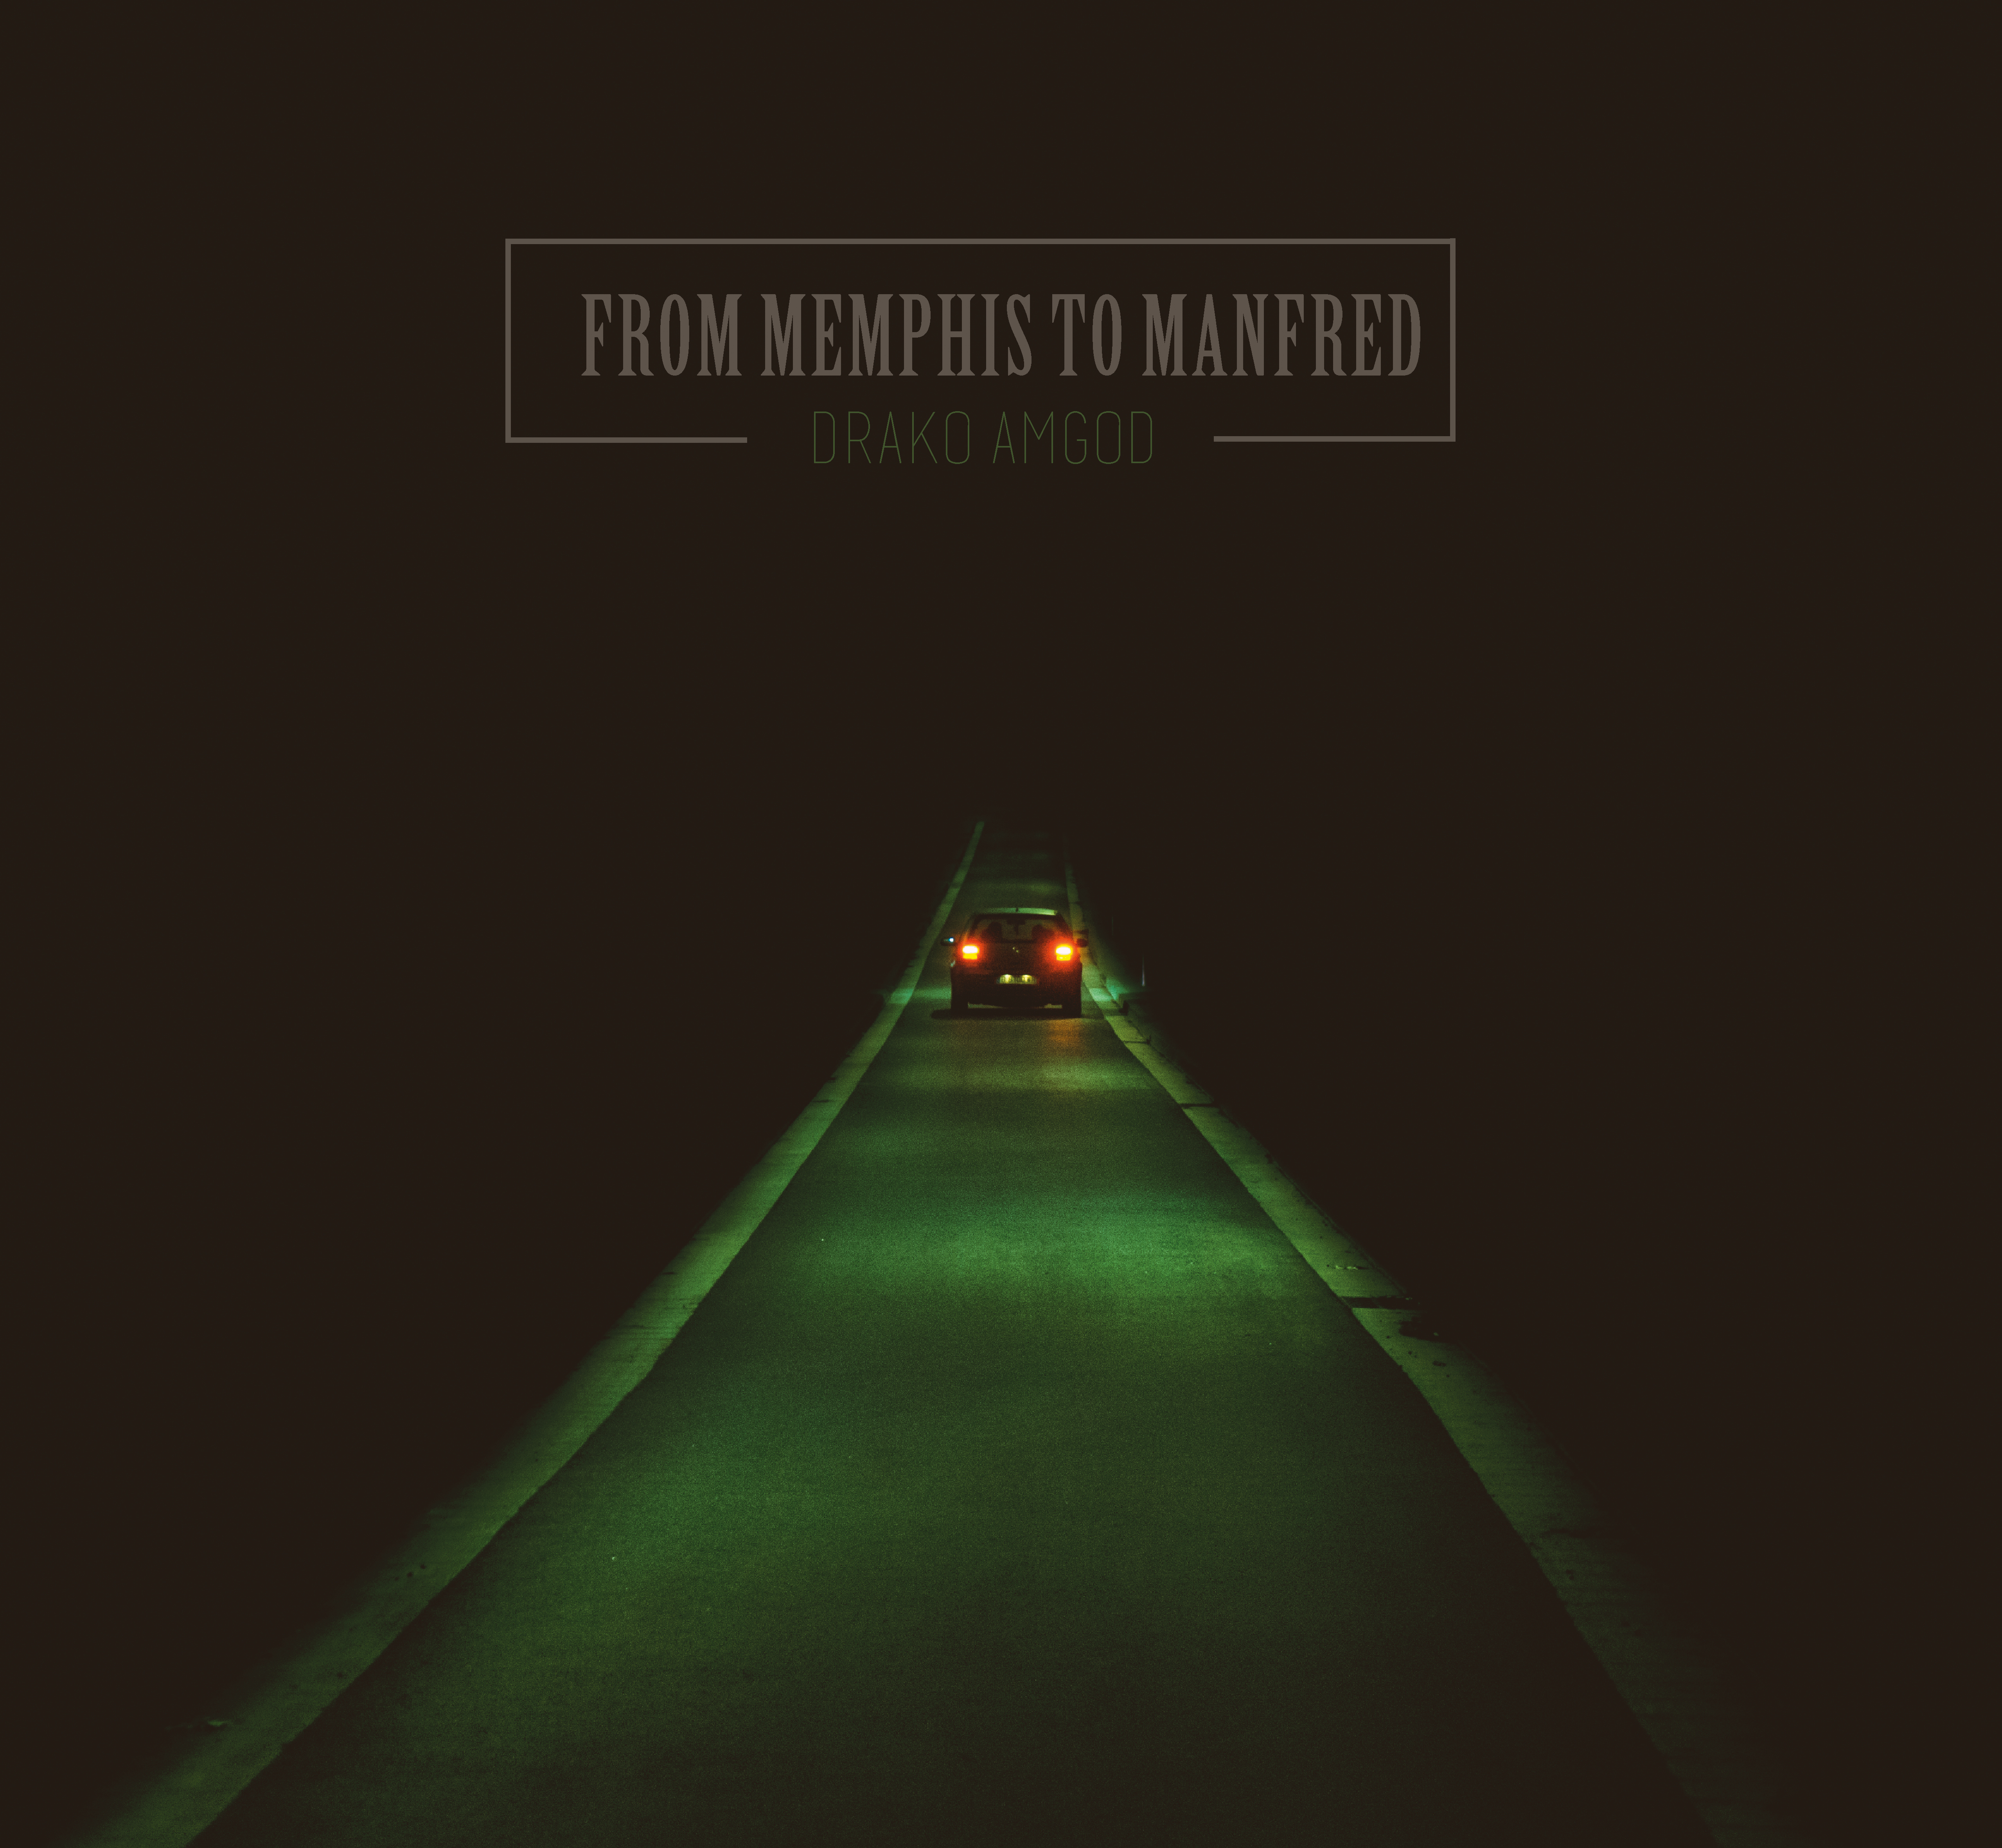 From_memphis_to_manfred